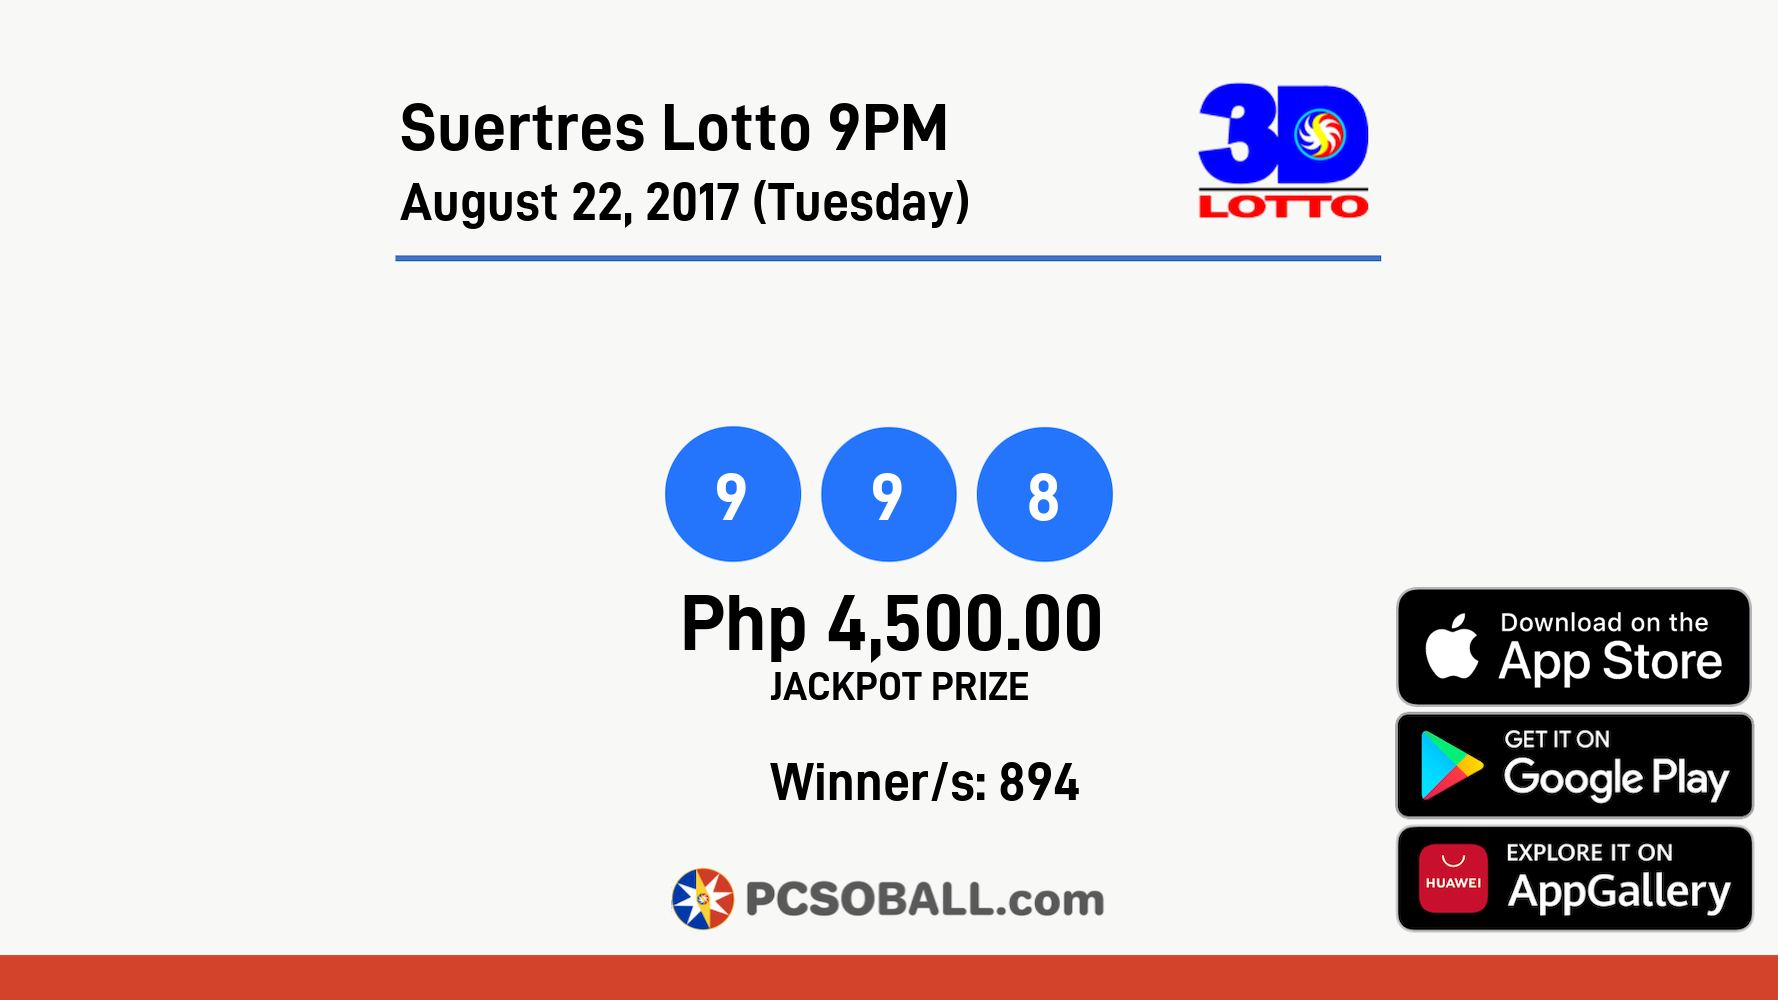 Suertres Lotto 9PM August 22, 2017 (Tuesday) Result